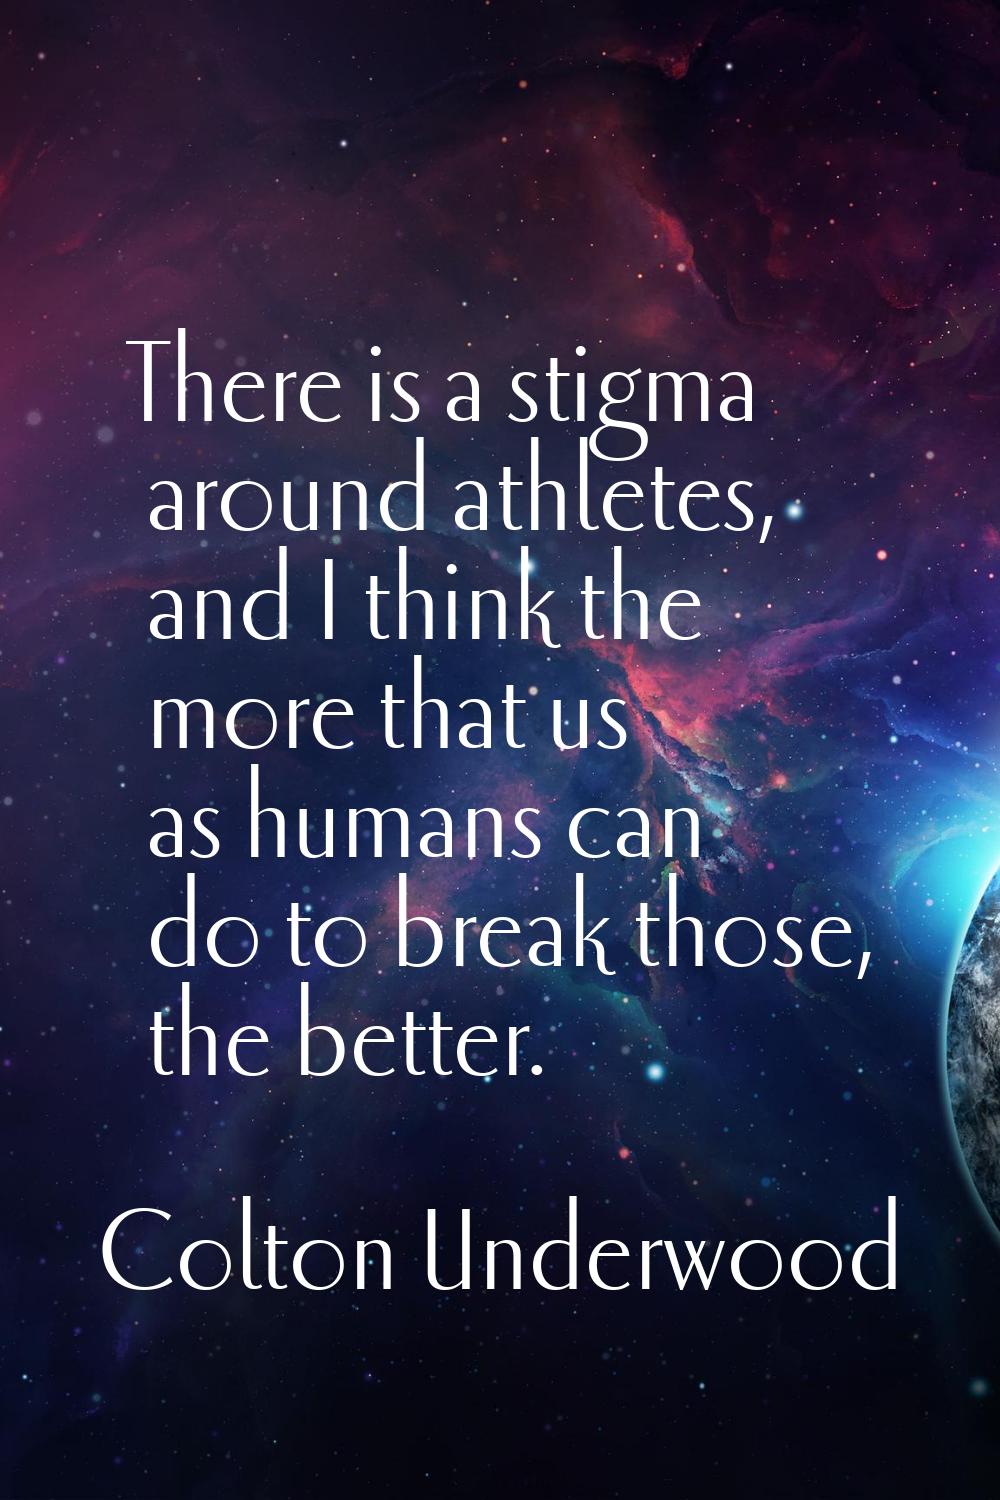 There is a stigma around athletes, and I think the more that us as humans can do to break those, th